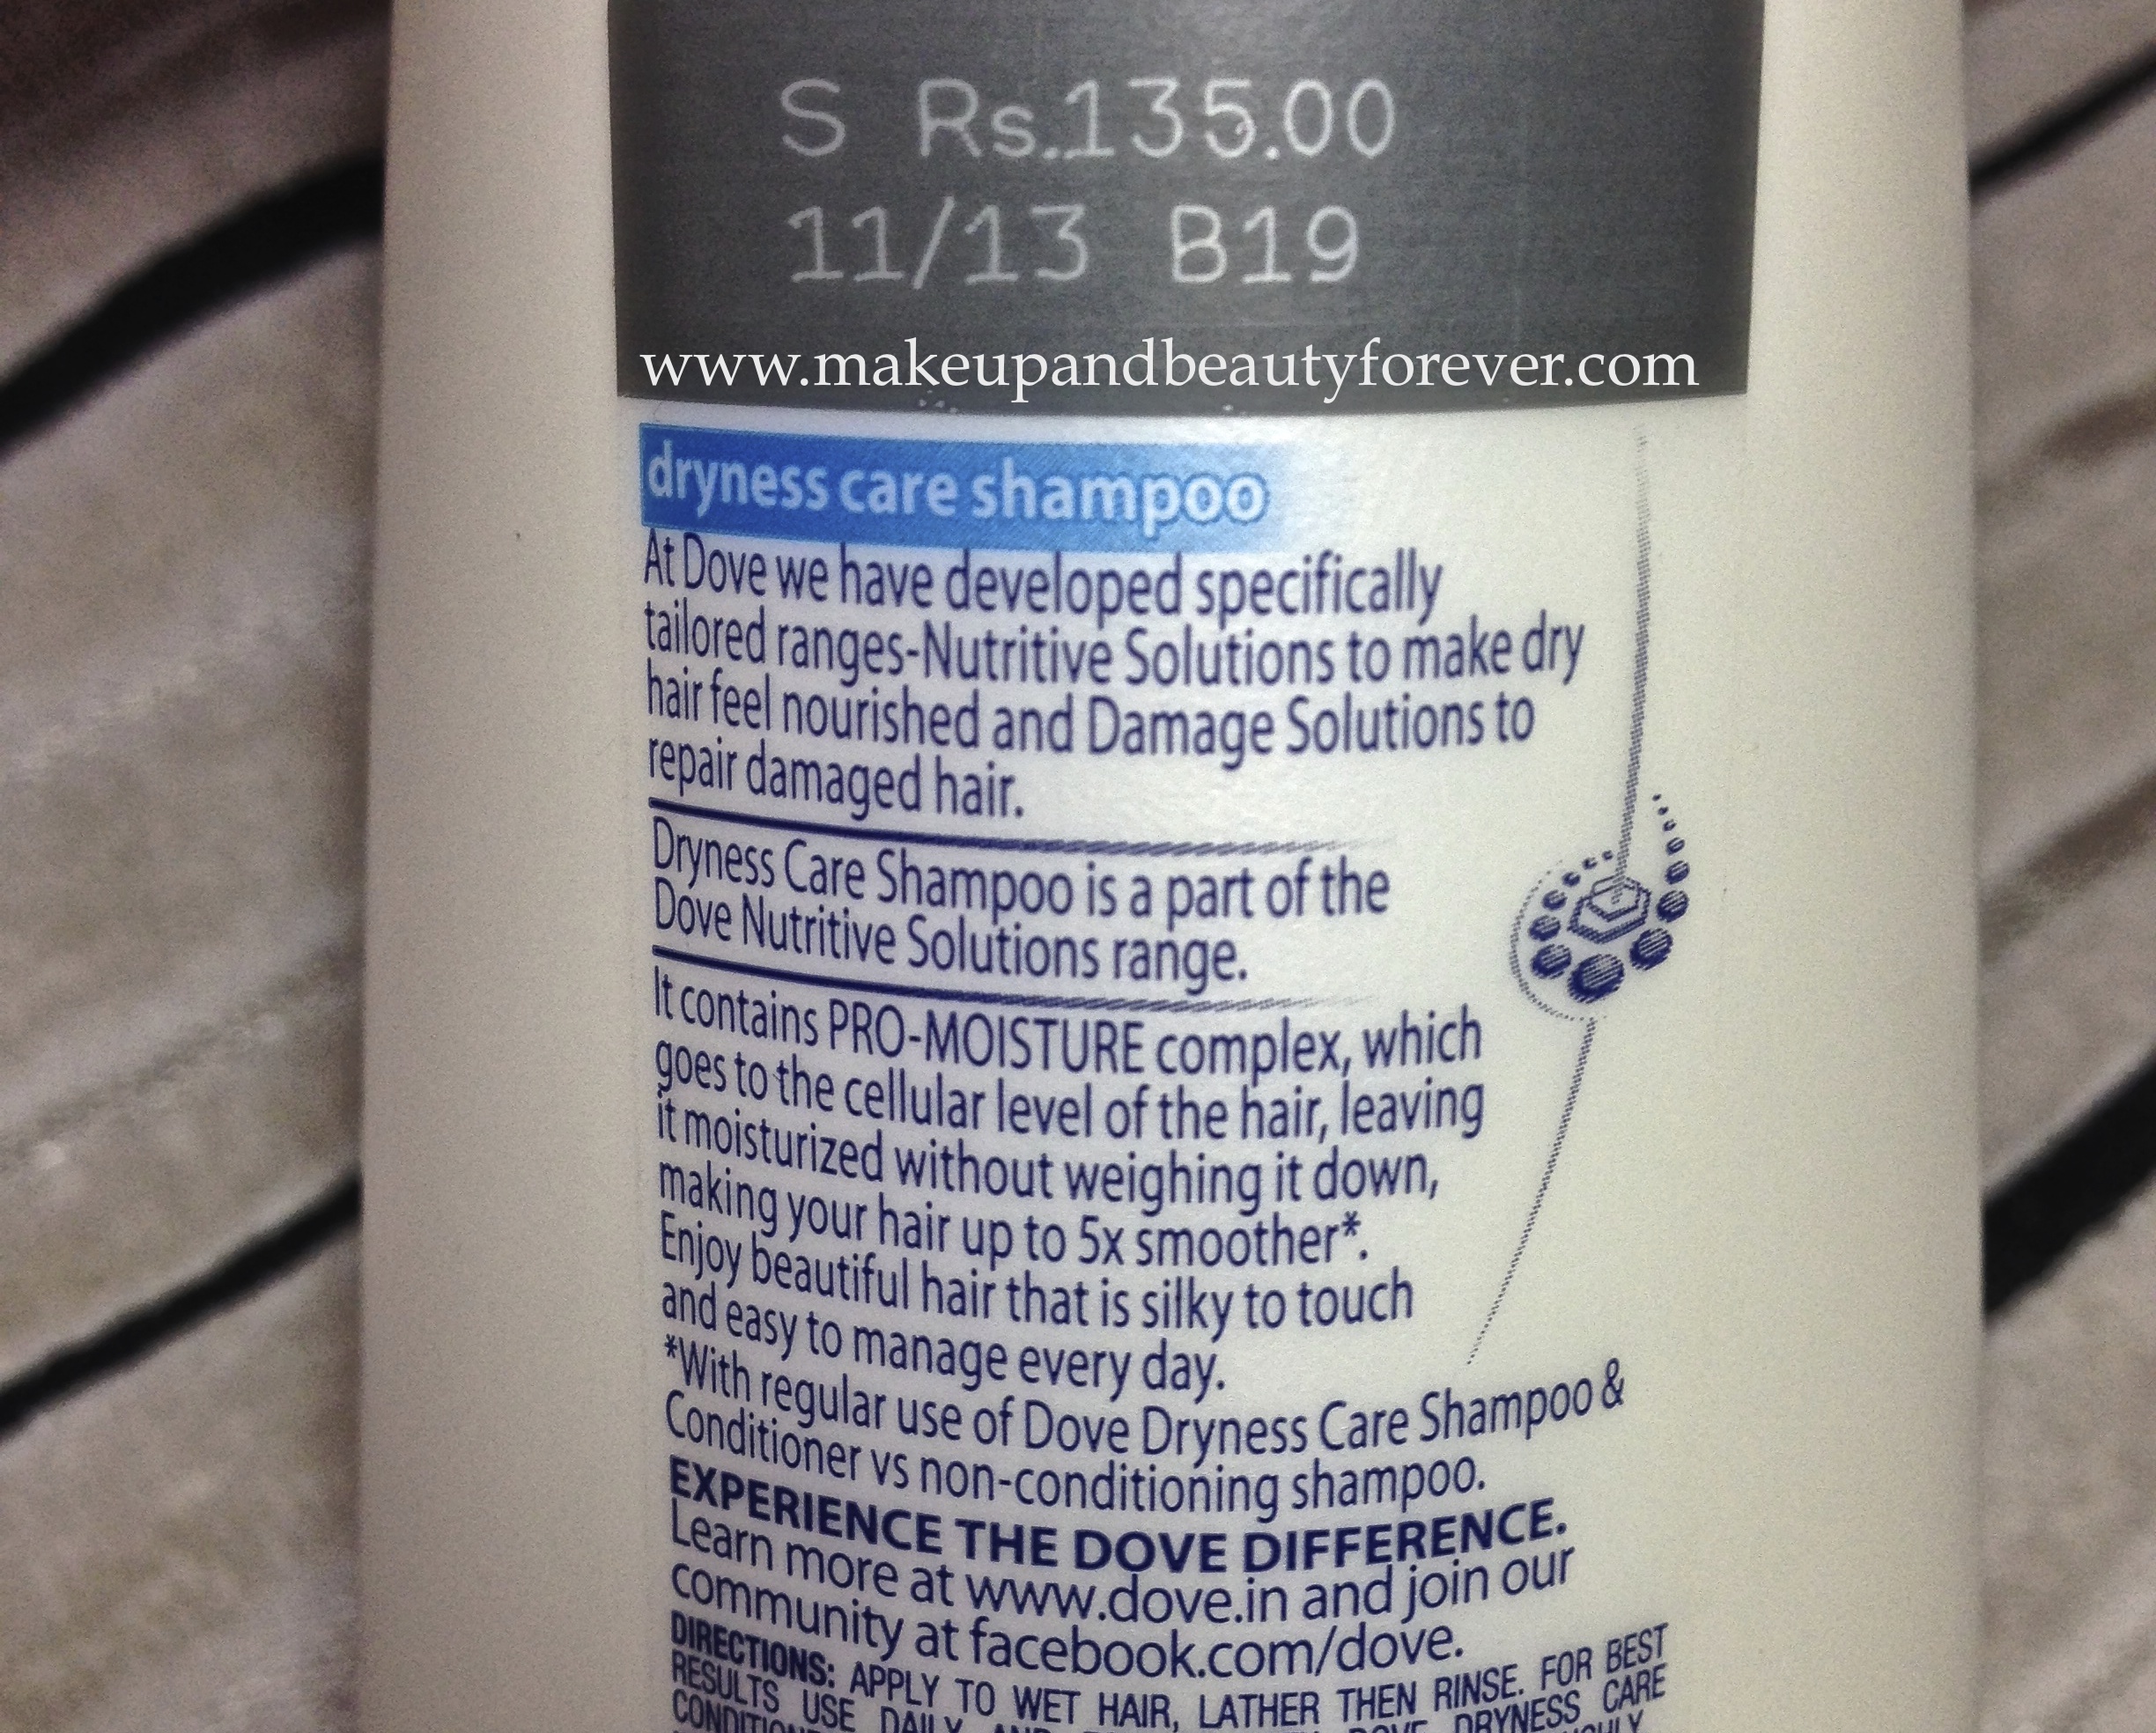 Popular brands of dry shampoo including Dove recalled by Unilever over  cancer risk  Mint